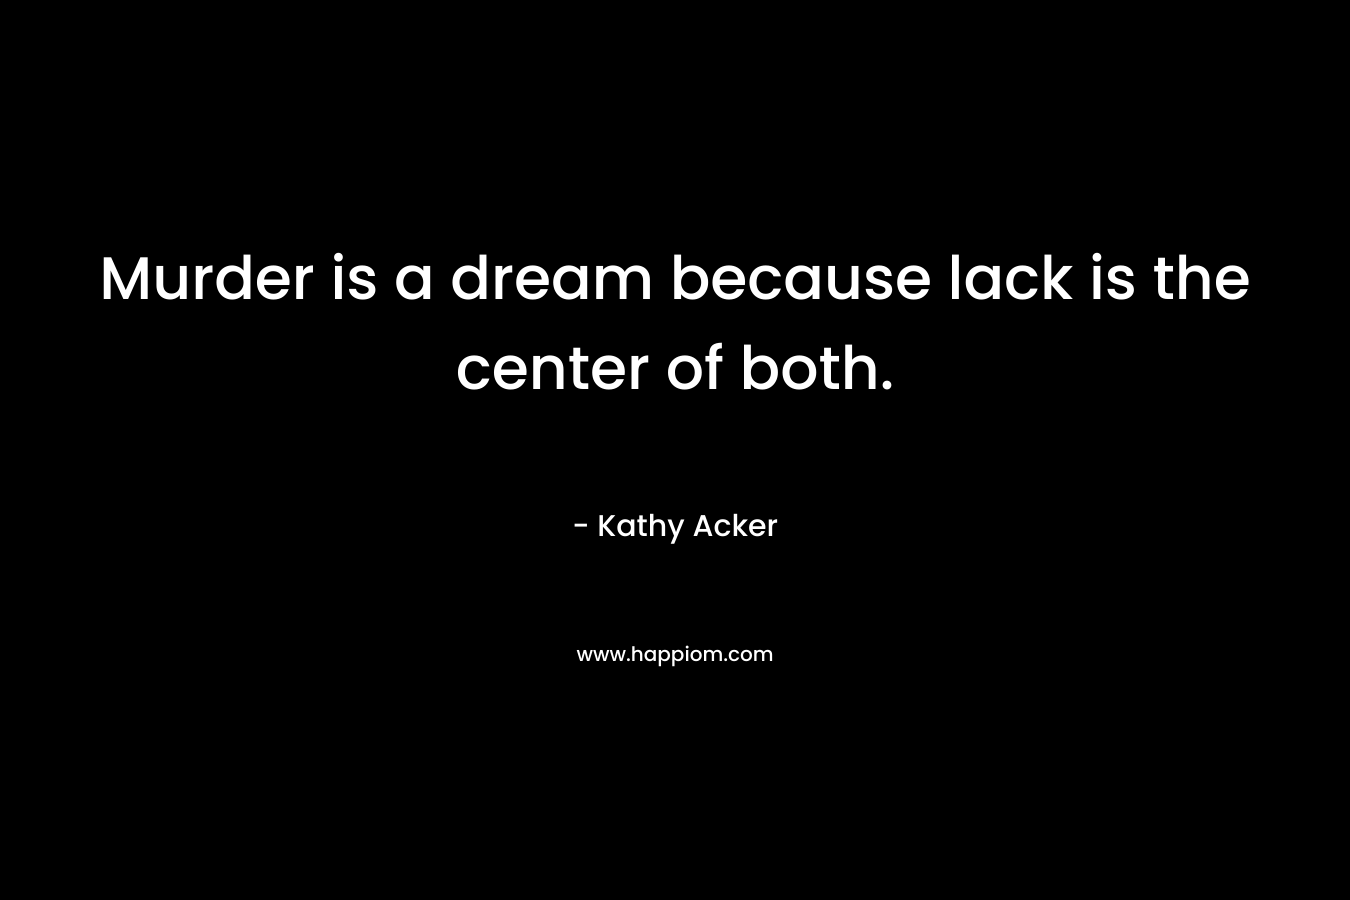 Murder is a dream because lack is the center of both. – Kathy Acker